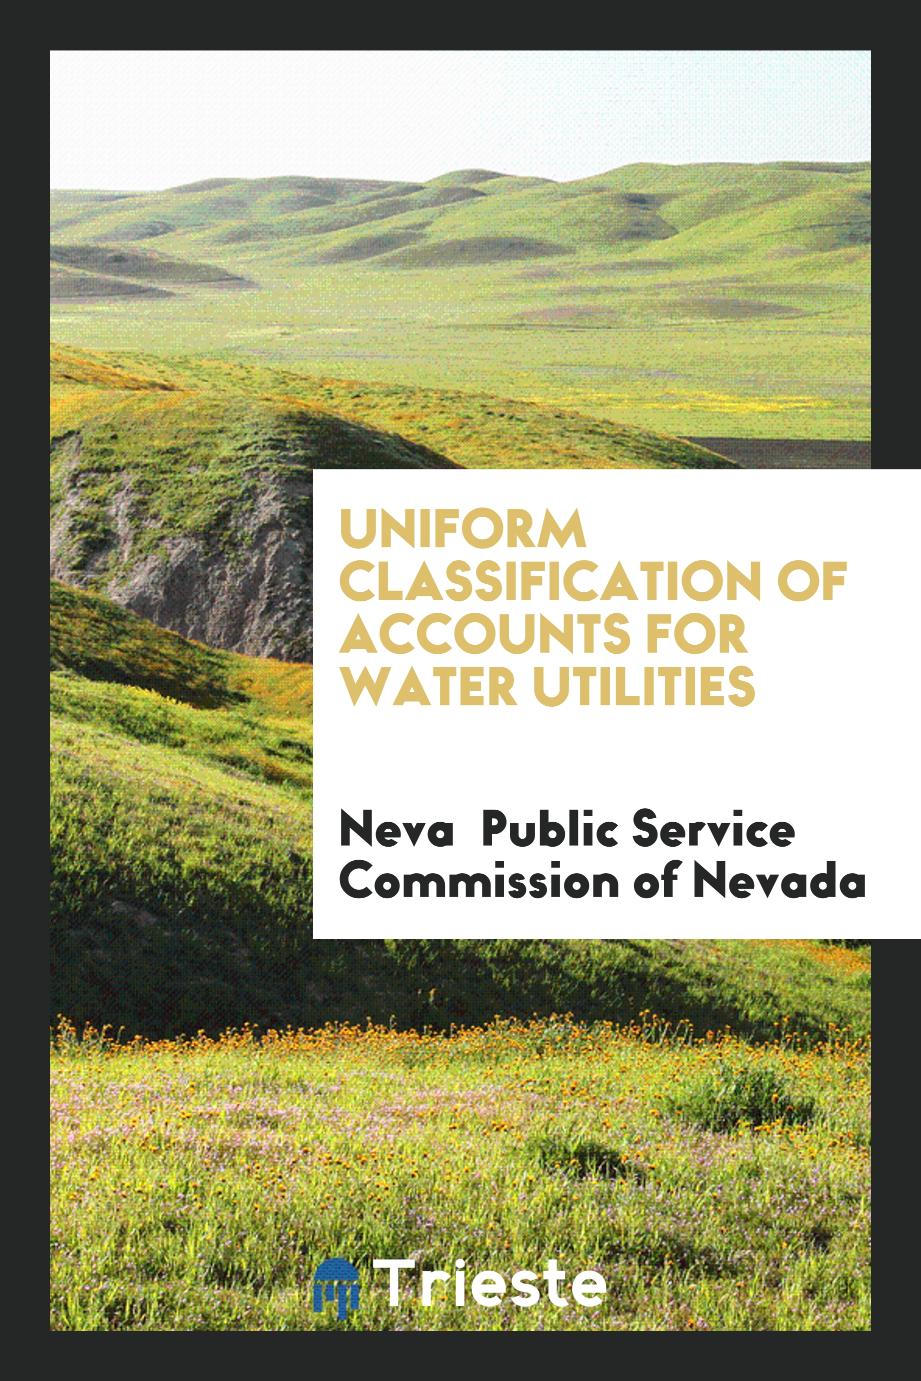 Uniform Classification of Accounts for Water Utilities